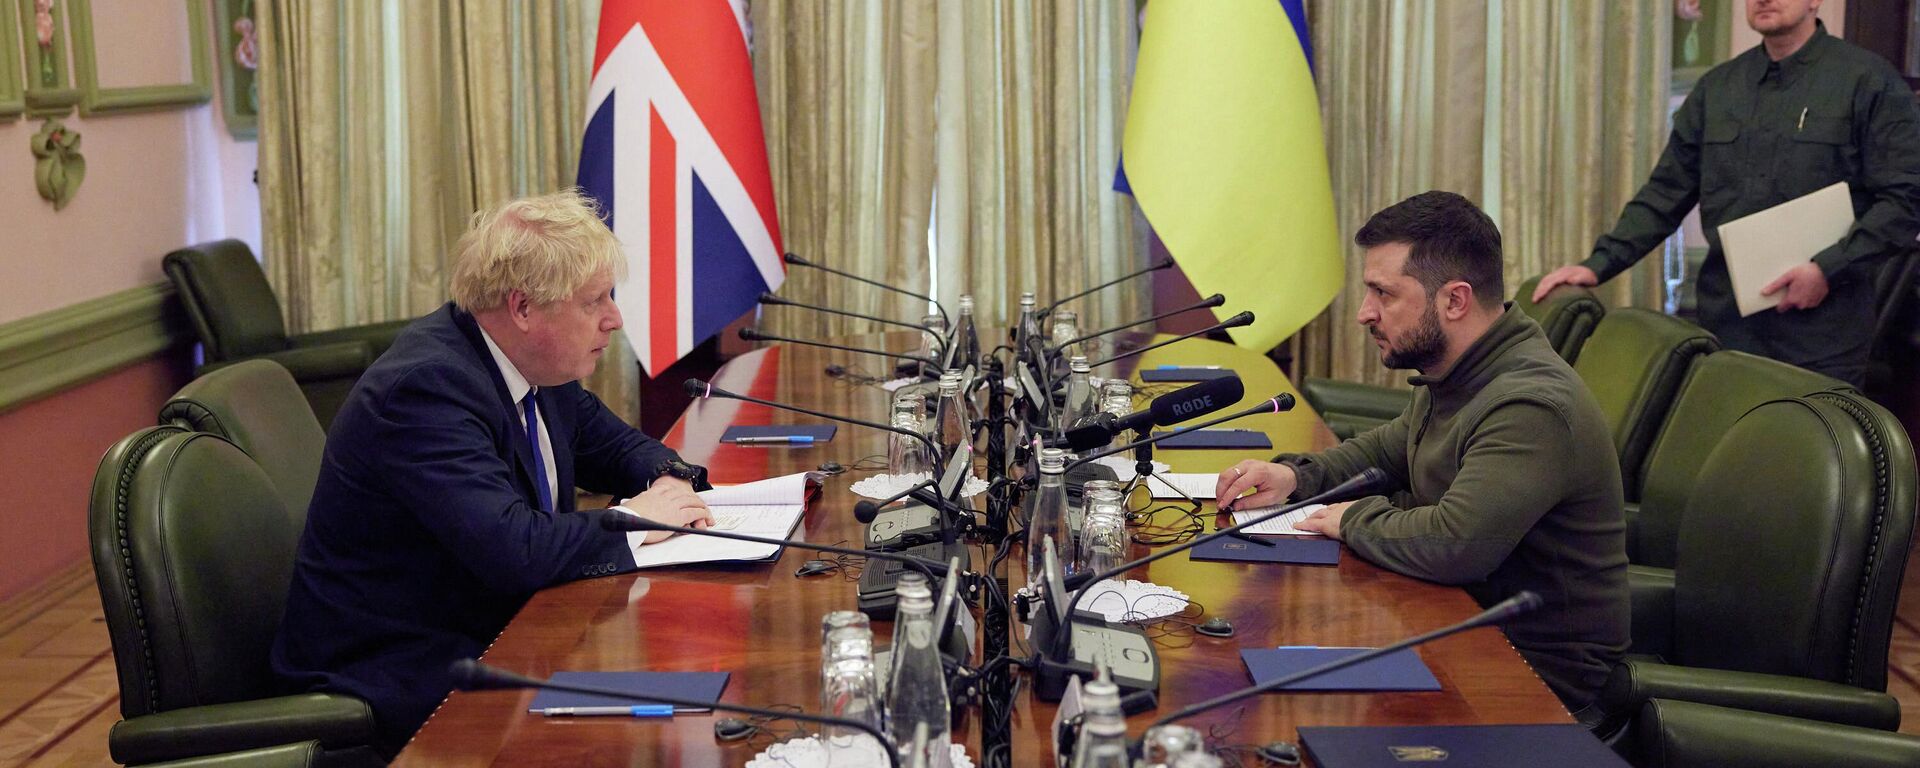 This handout picture taken and released on April 9, 2022 by Ukrainian Presidential Press Service shows Ukrainian President Volodymyr Zelensky (2R) speaking with British Prime Minister Boris Johnson (L) during their meeting in Kiev. - Sputnik International, 1920, 18.04.2022